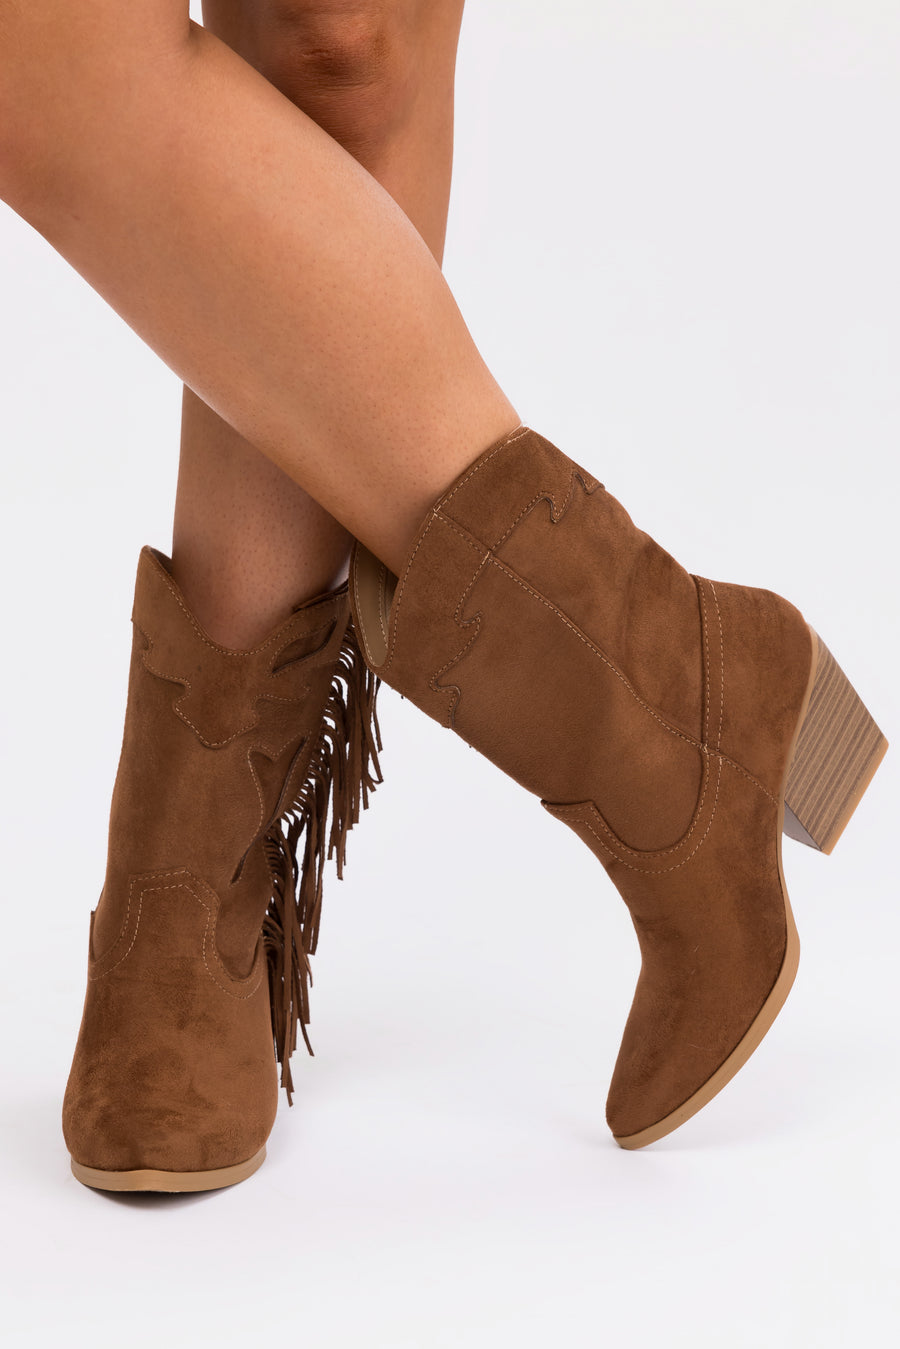 Spice Suede Fringe Embroidered Heeled Boots